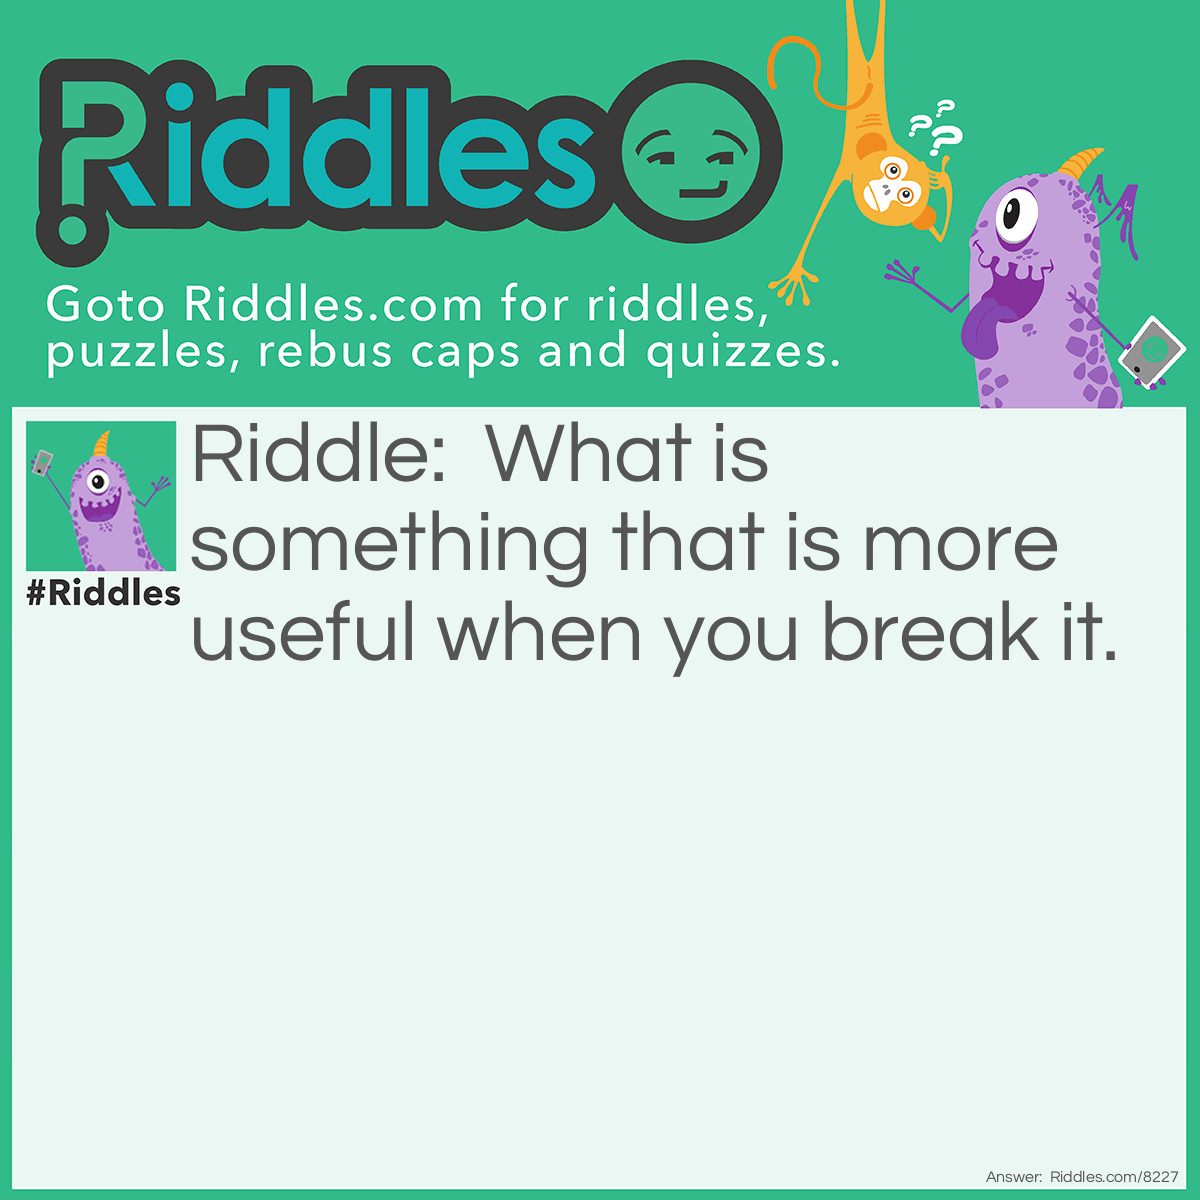 Riddle: What is something that is more useful when you break it. Answer: A glow stick.